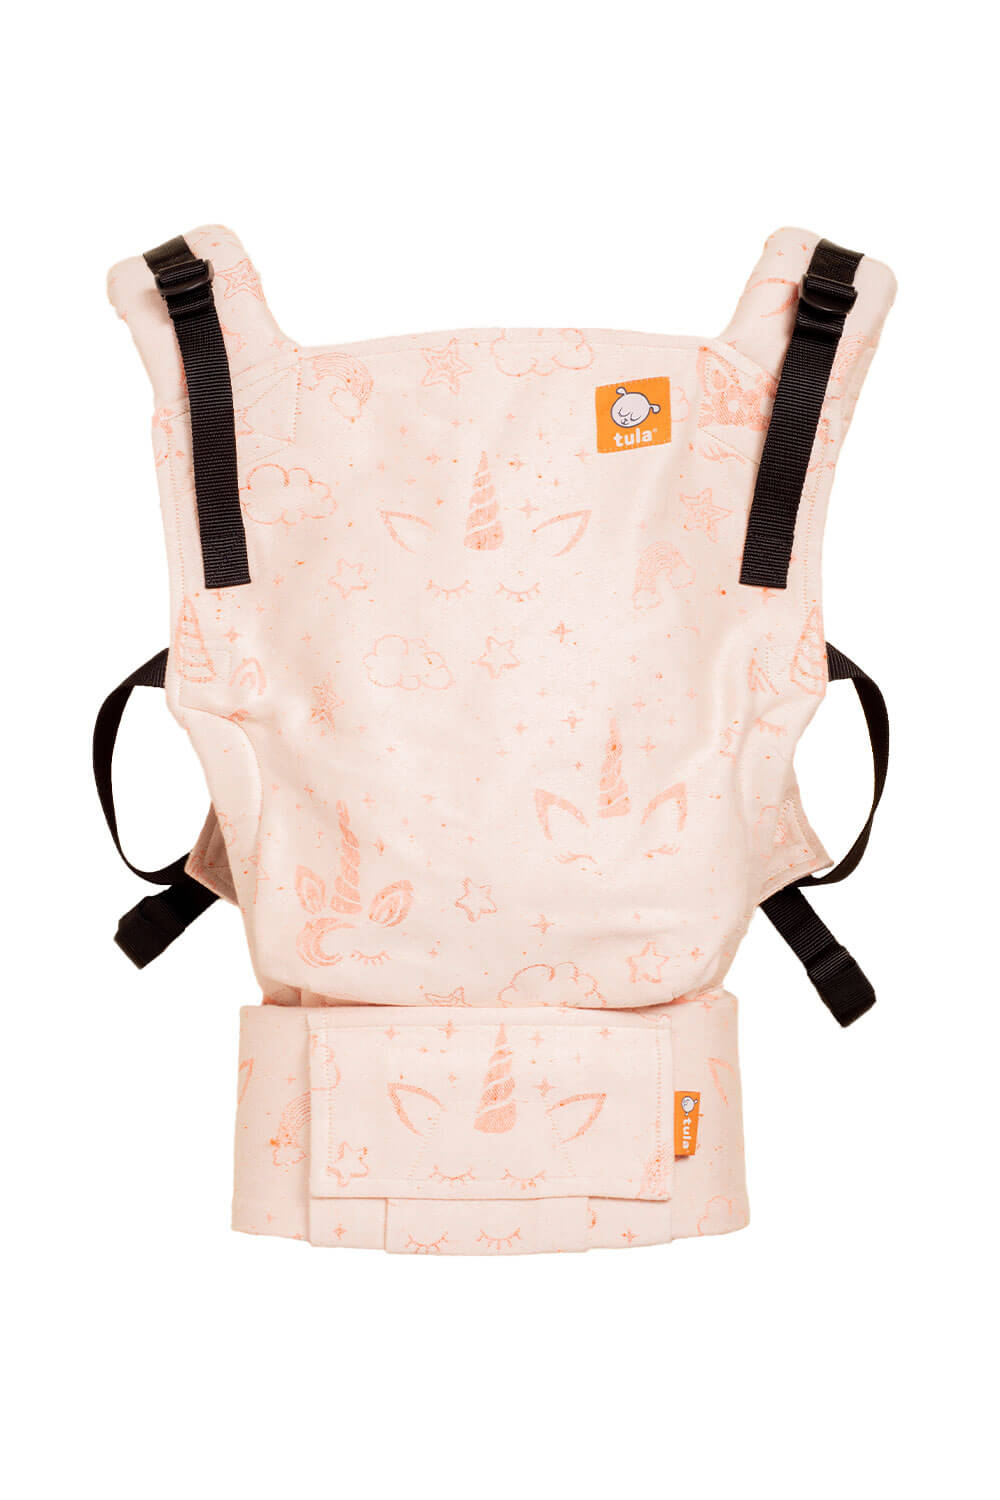 Unicorn Peach Heaven - Signature Woven Free-to-Grow Baby Carrier